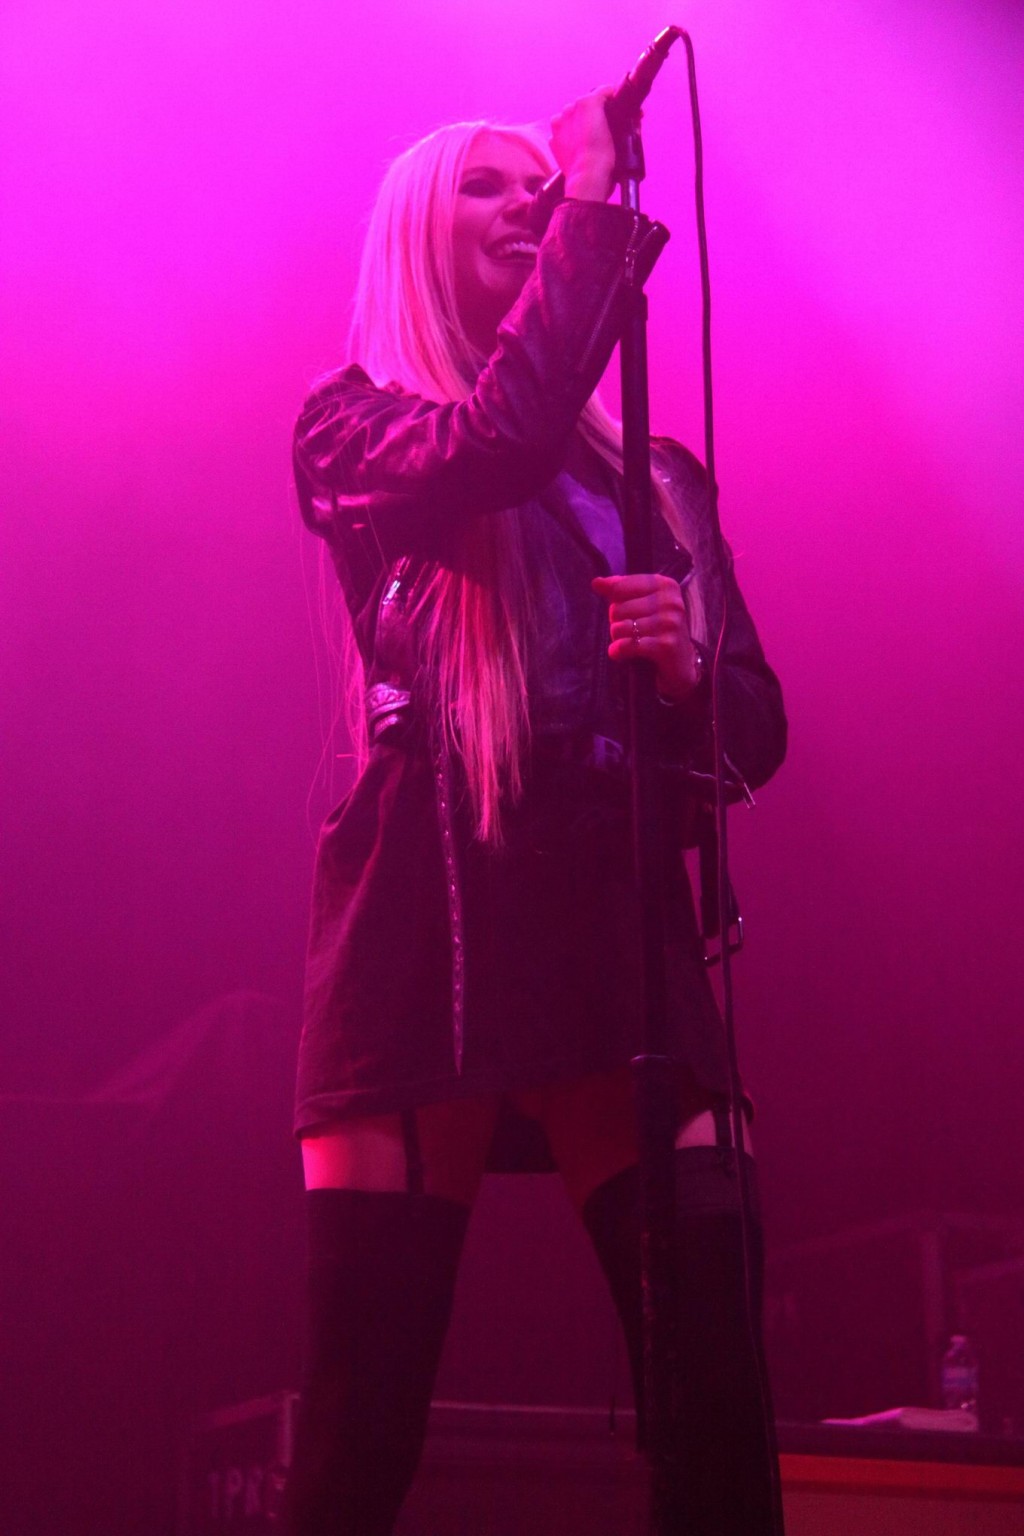 Taylor Momsen flashing her panties on stage in Montreal #75284242